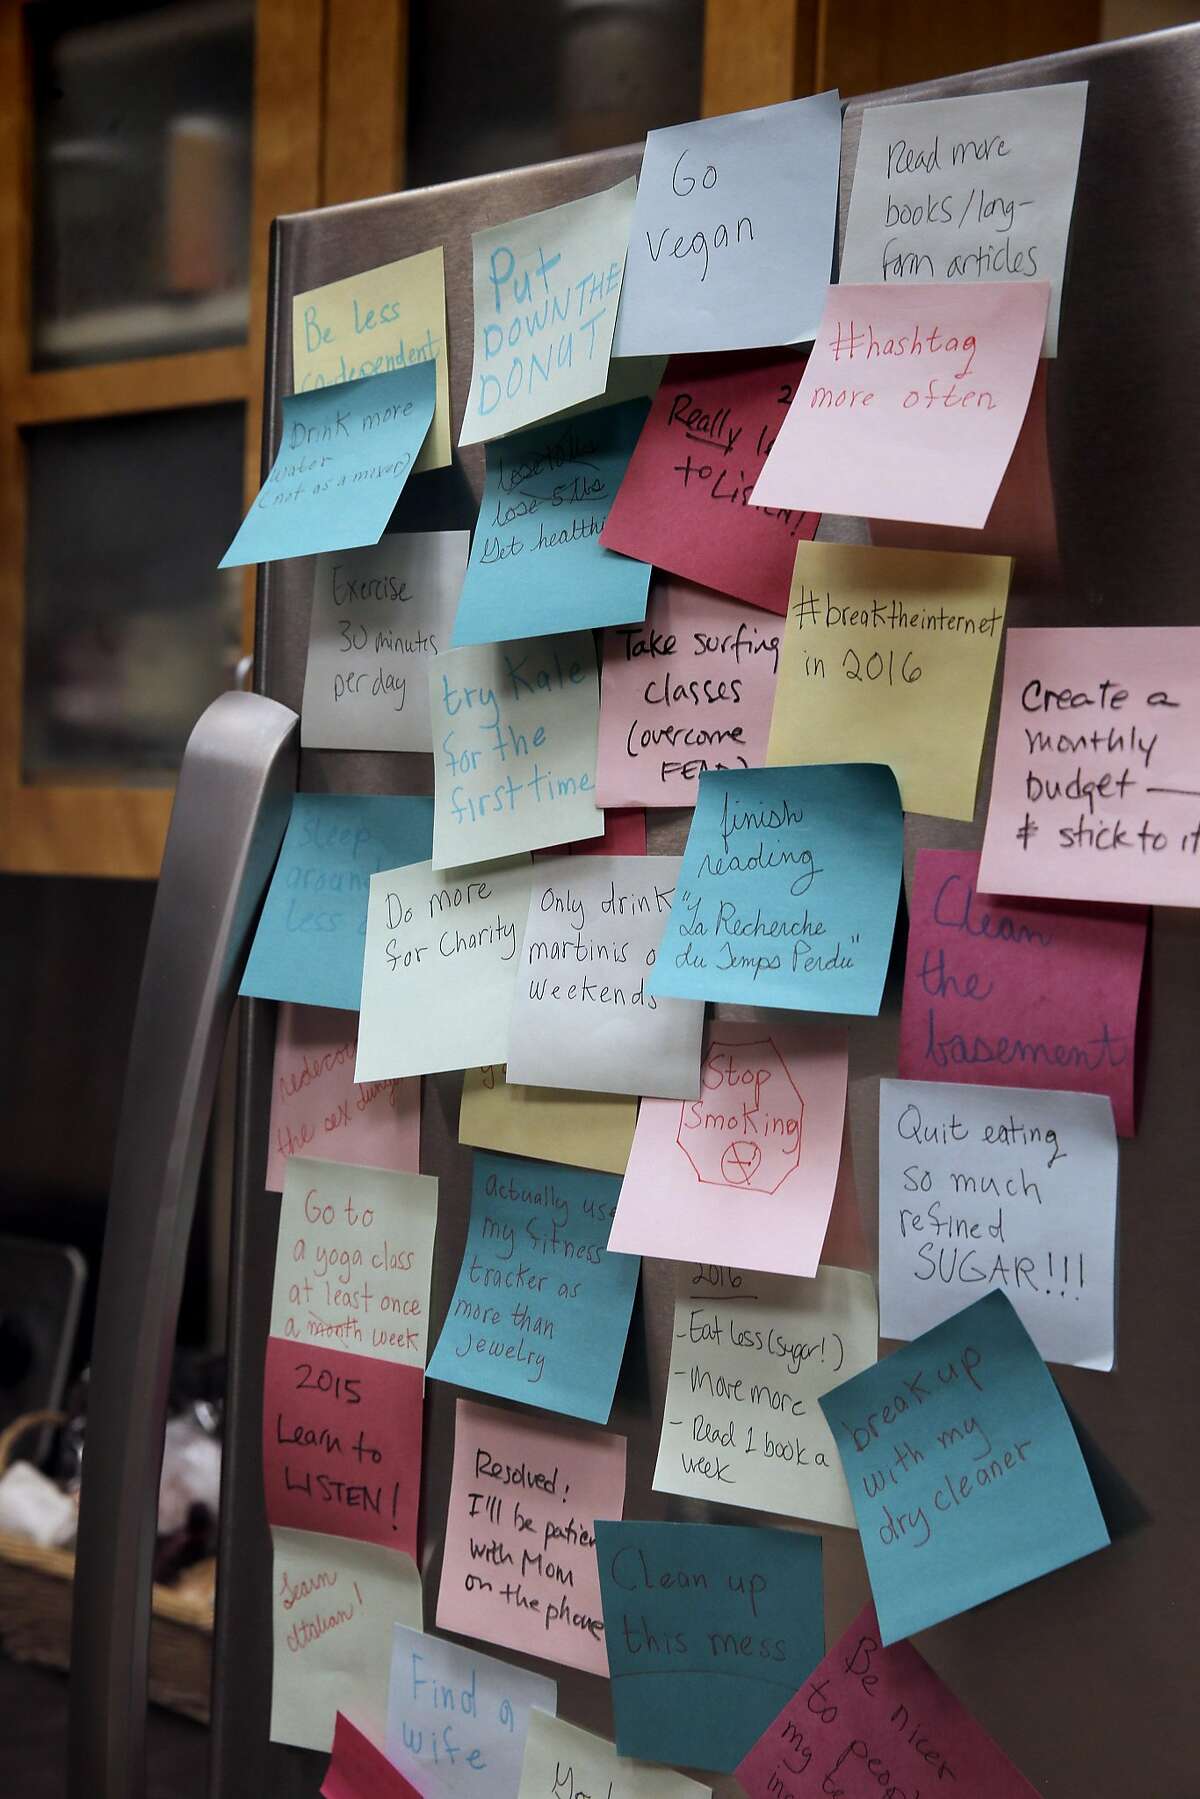 Post-it notes illustrating New Year's resolutions for 2016 in San Francisco. Like everything else, social media has changed the process of resolution-making.